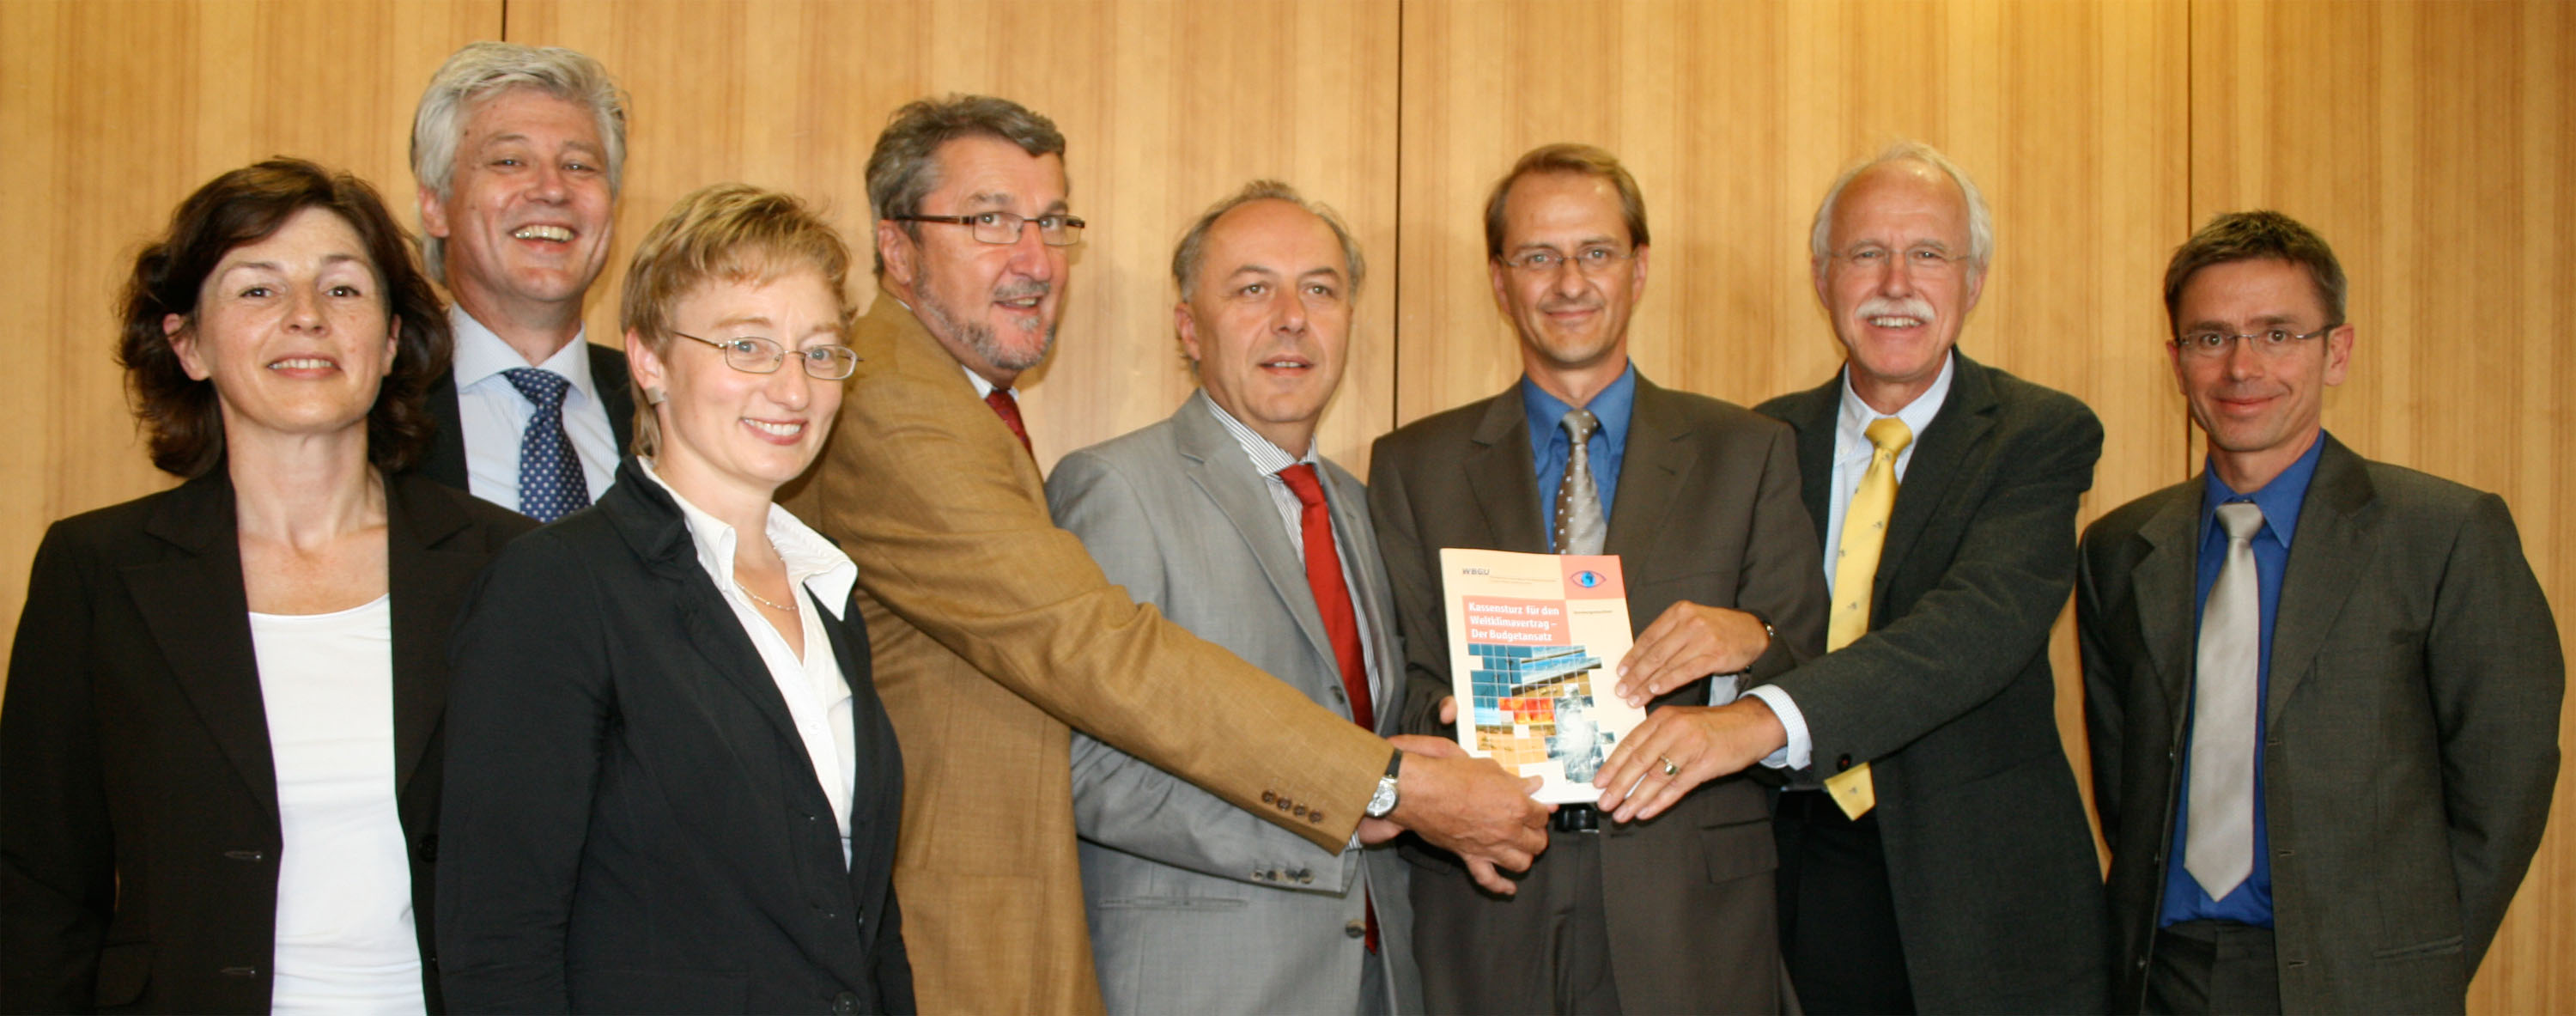 Handing over the special report "Solving the climate dilemma: The budget approach"